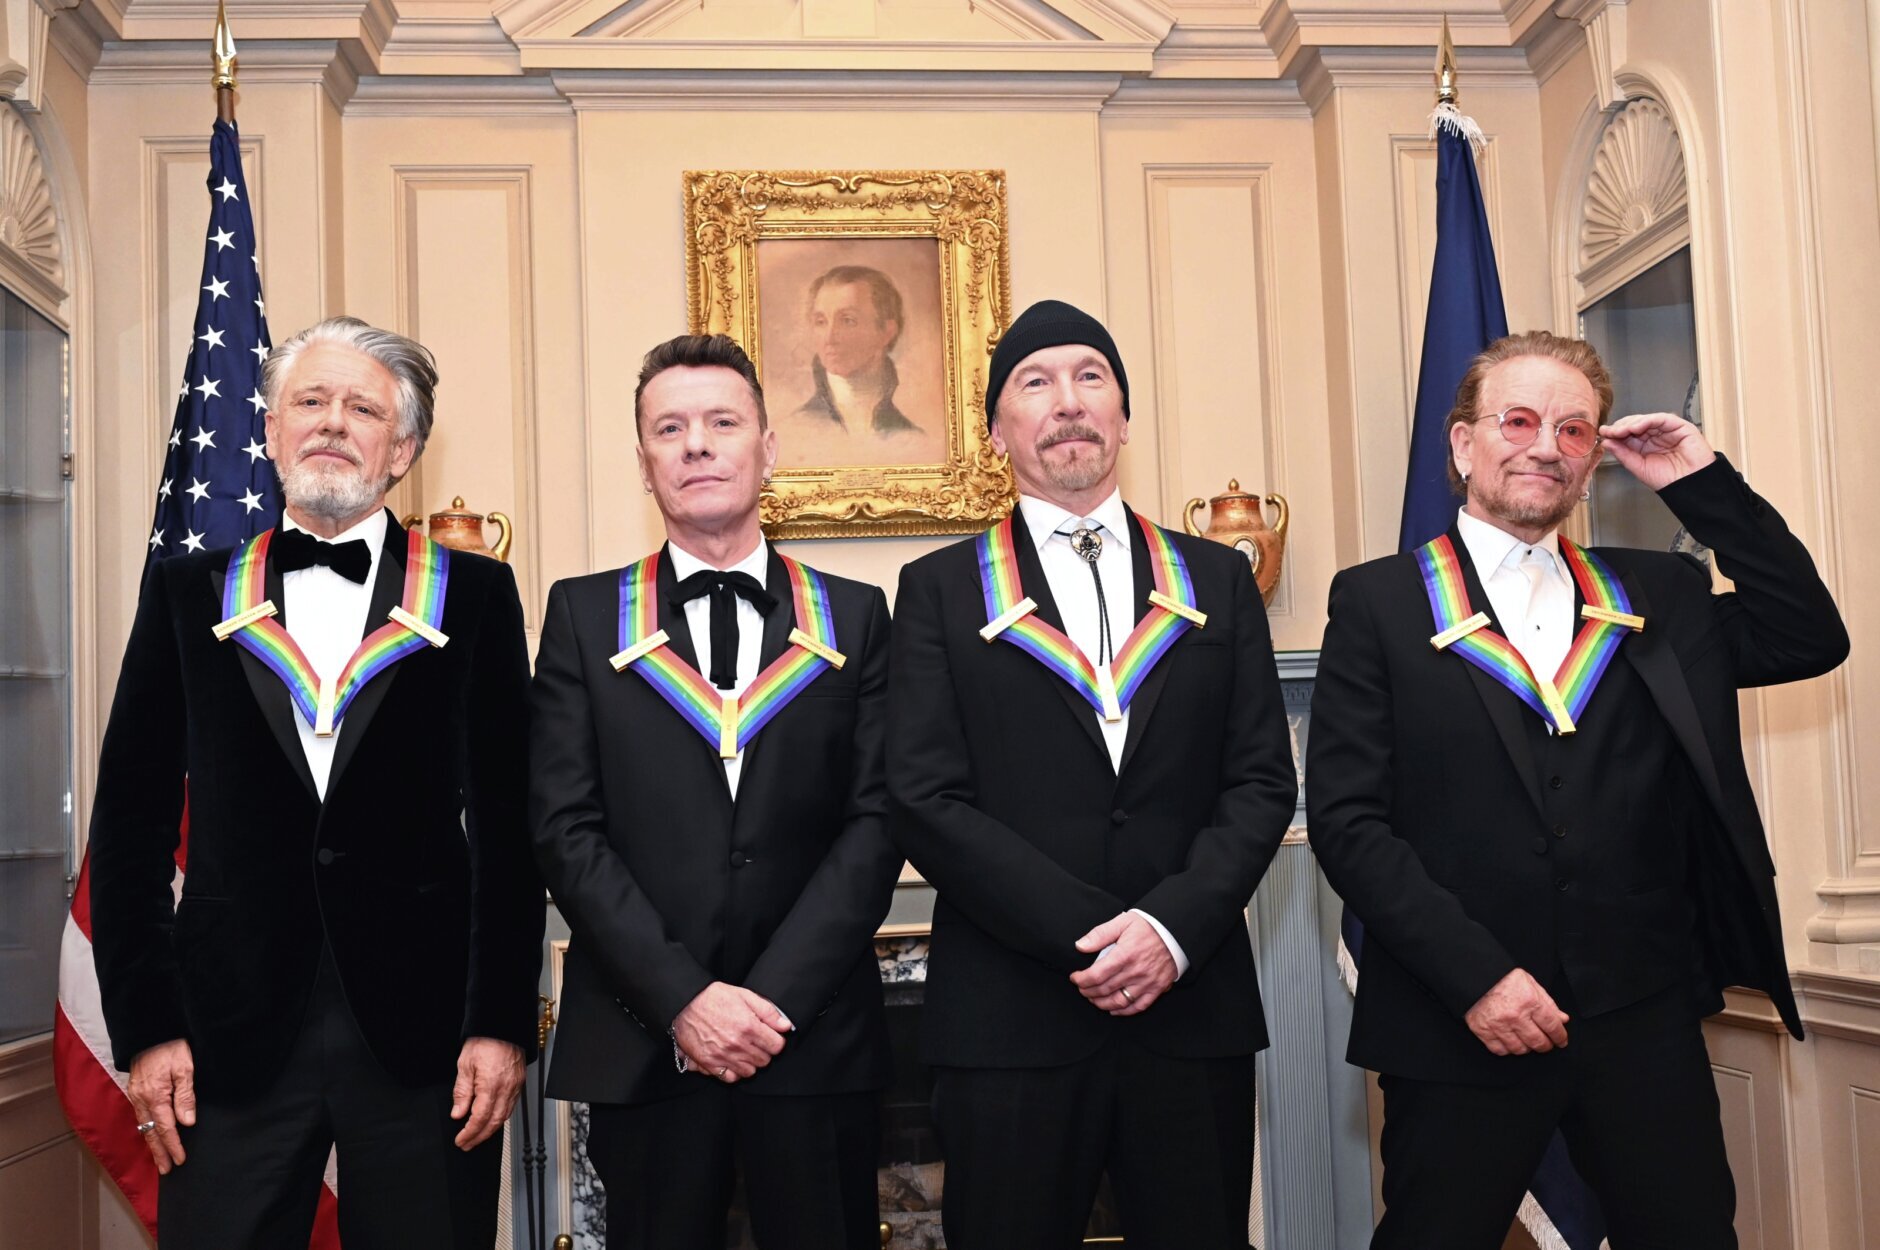 Kennedy Center Honors State Department Dinner